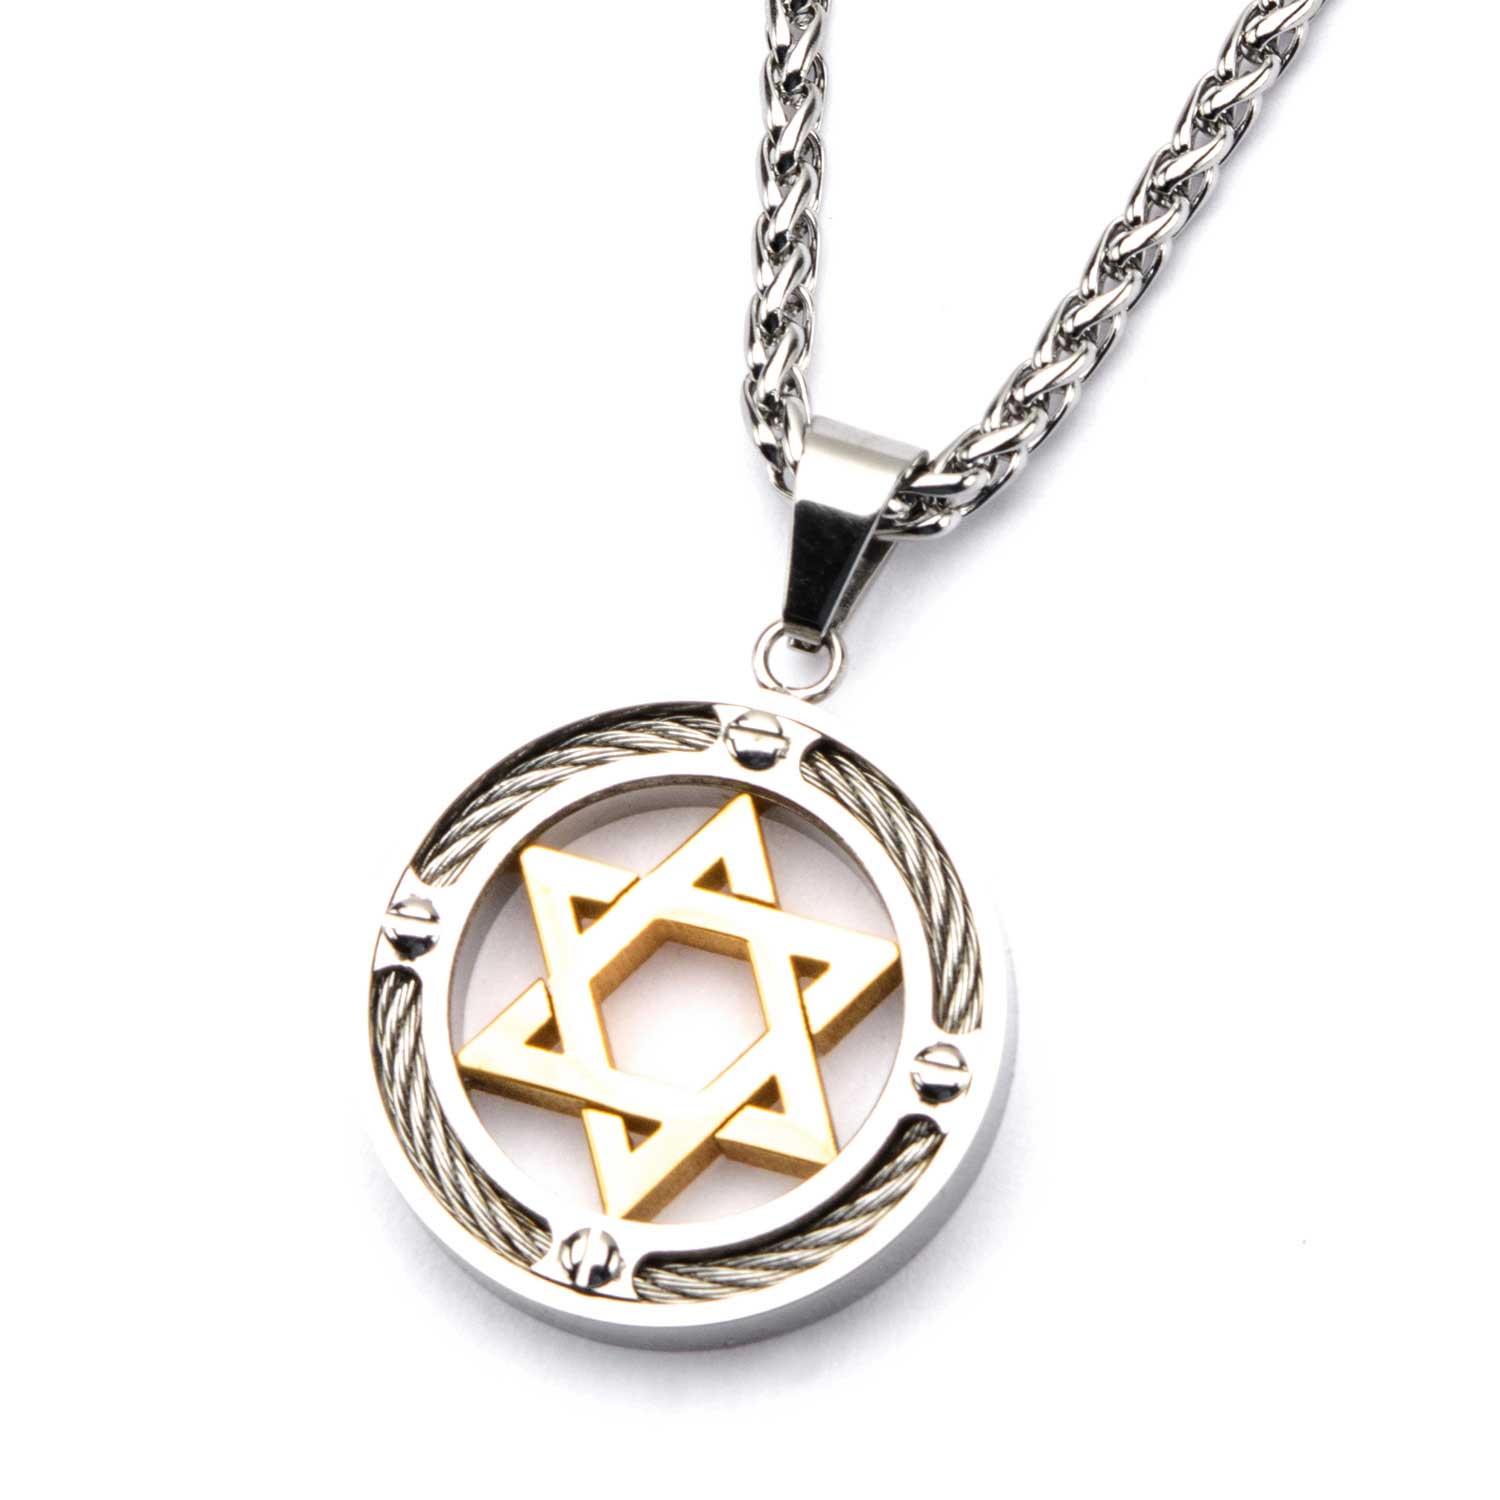 Steel Gold Plated Star of David with Cable Inlayed in Circle Pendant Image 2 Midtown Diamonds Reno, NV